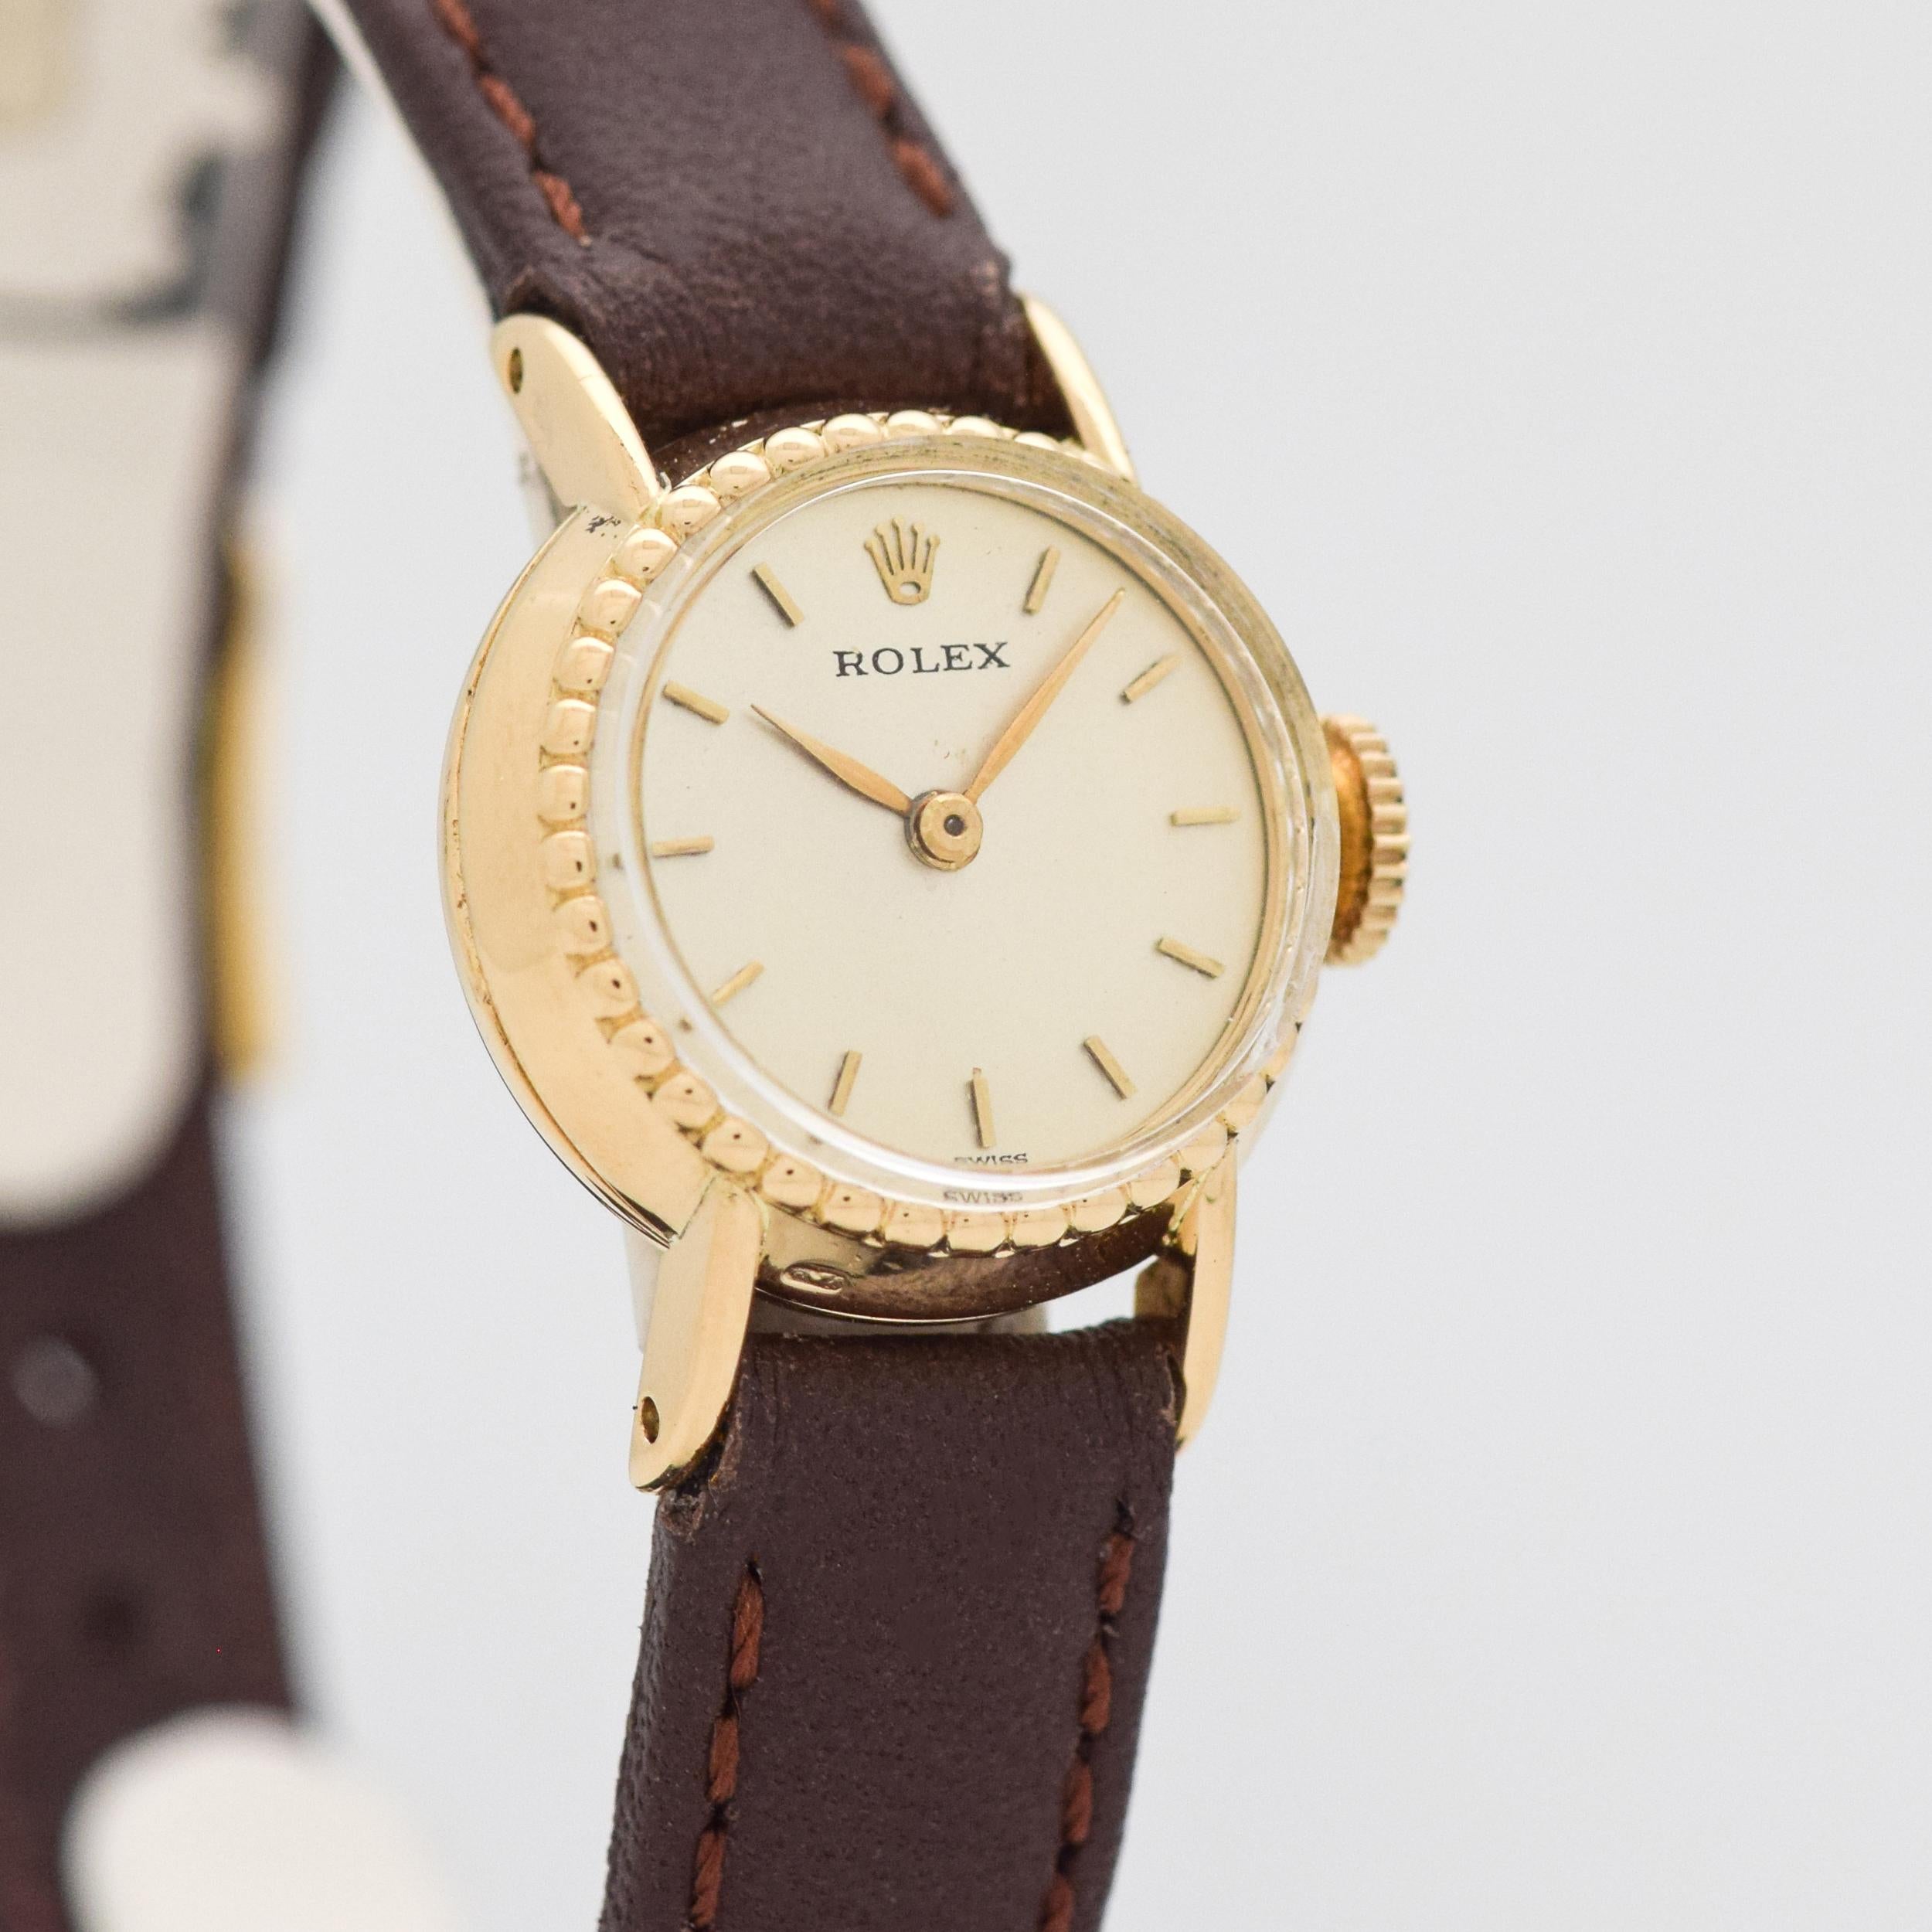 1960's - 1970's Vintage Rolex Ladies Ref. 9111 18K Yellow Gold watch with Silver Dial with Applied Gold Stick/Bar/Baton Markers. Case size, 18mm x 22mm lug to lug (0.71 in. x 0.87 in.) - Powered by a 17-jewel, manual caliber movement. Triple Signed.